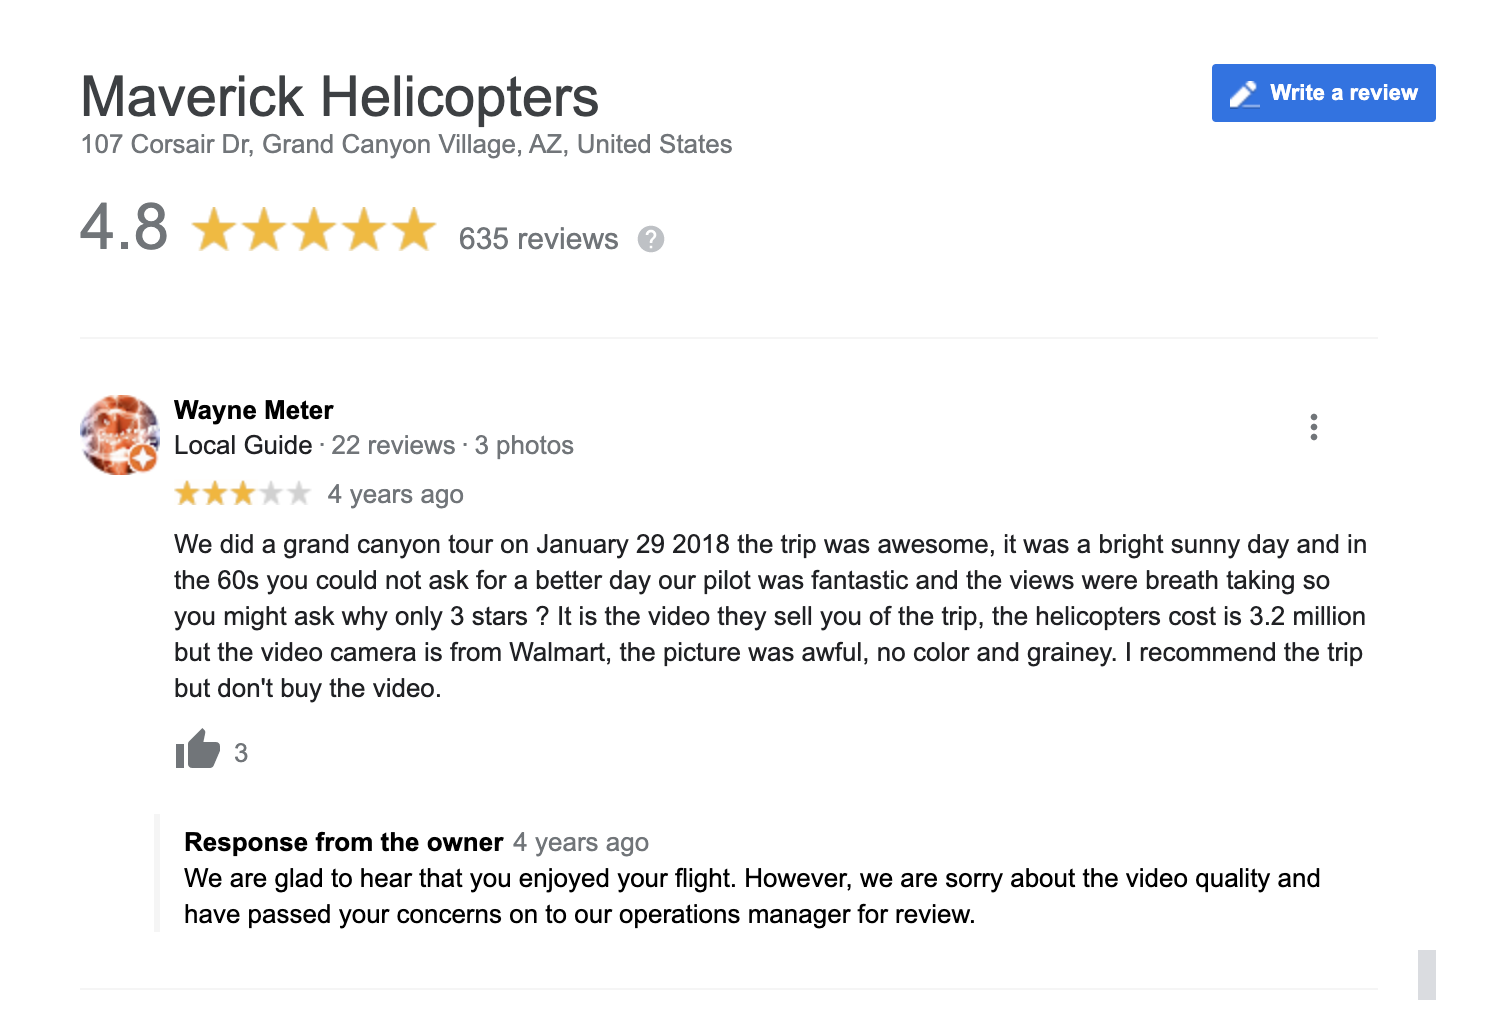 Customer review response amicably on Google